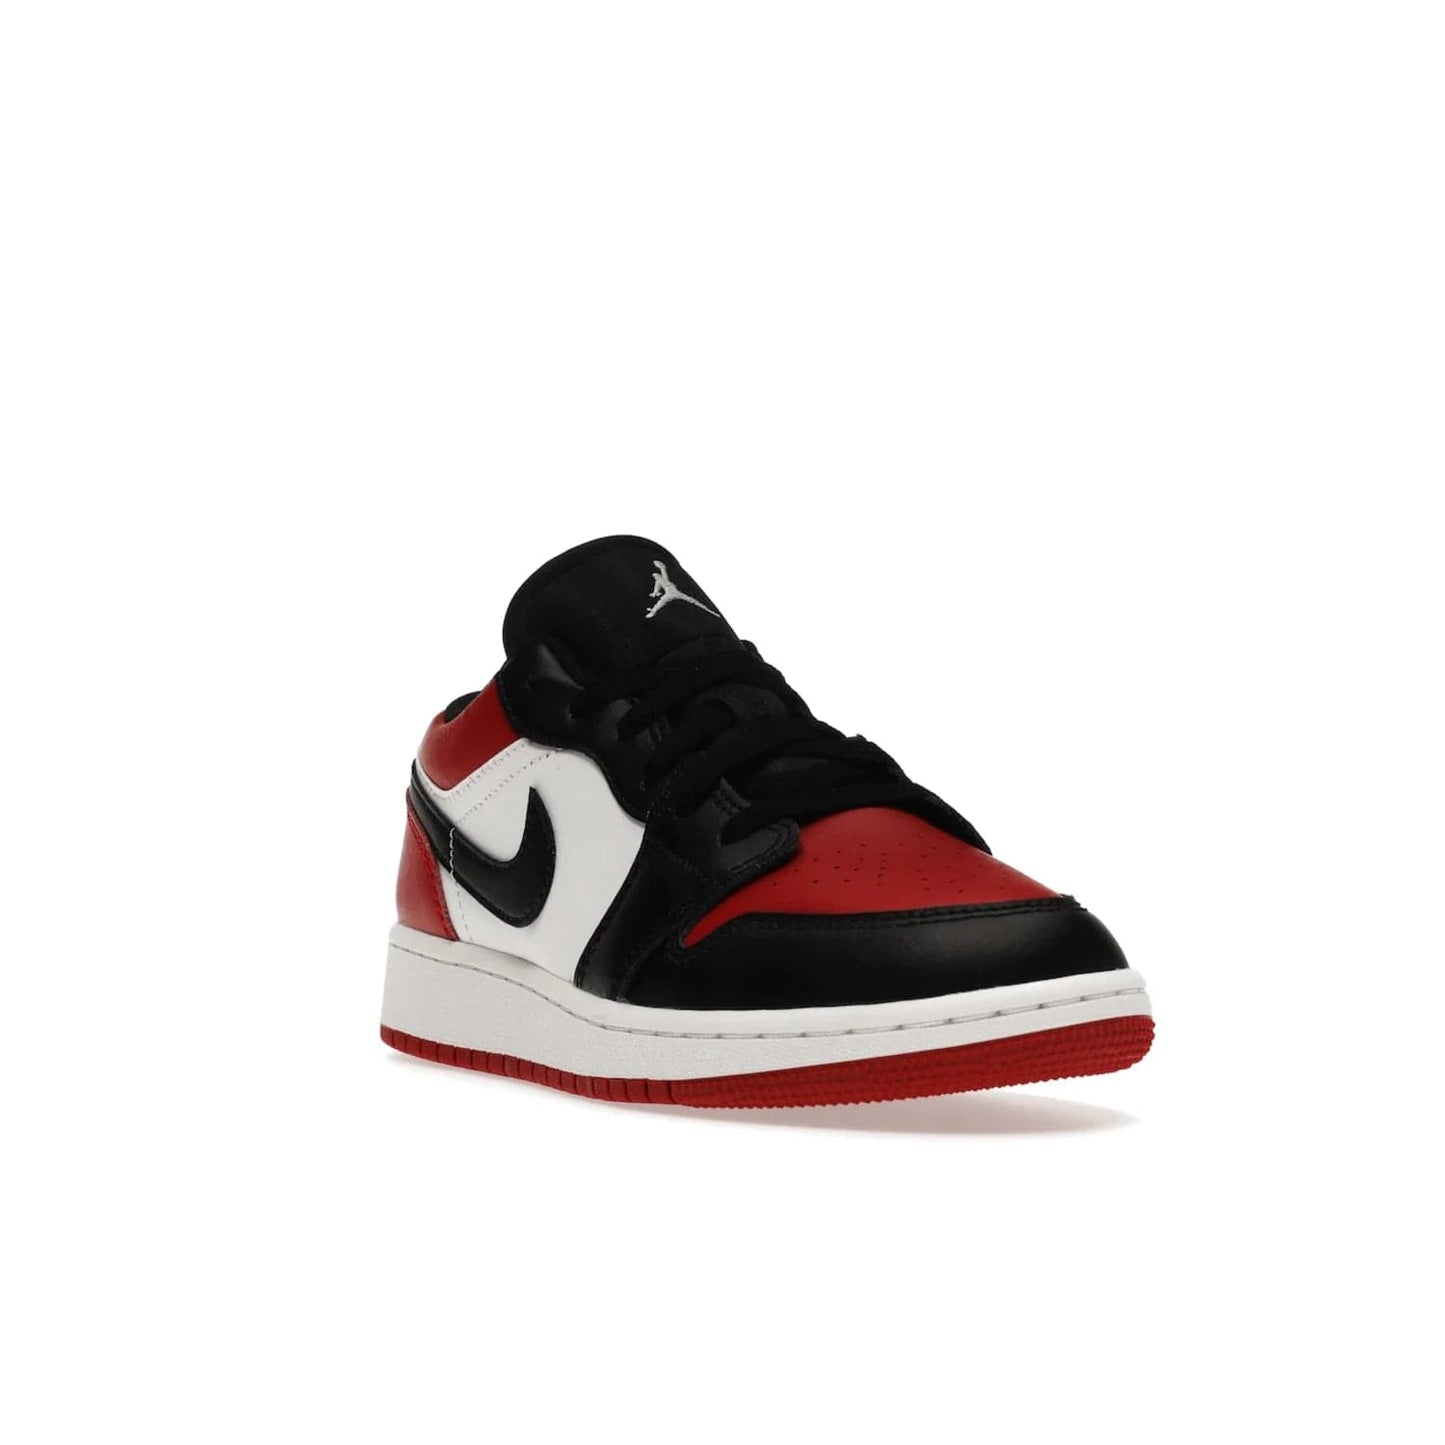 Jordan 1 Low Bred Toe (GS) - Image 7 - Only at www.BallersClubKickz.com - #
Iconic sneaker from Jordan brand with classic colorway, unique detailing & Air Jordan Wings logo. Step into the shoes of the greats with the Jordan 1 Low Bred Toe GS!